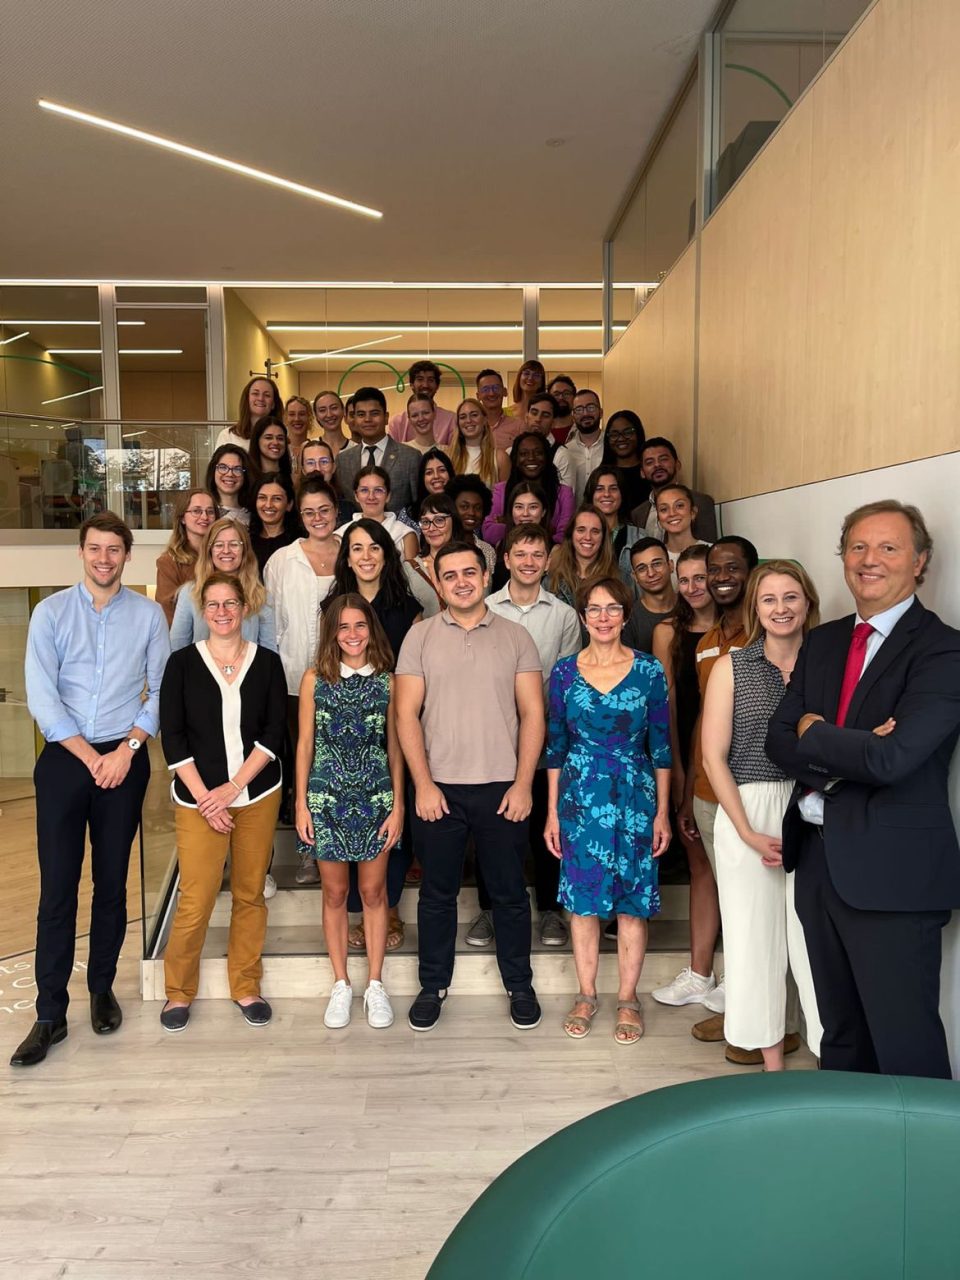 Kate Ndocko: I had the opportunity of participating in Barcelona in the Youth Ambassador Summer School. Some key takeaways from this high-level event.